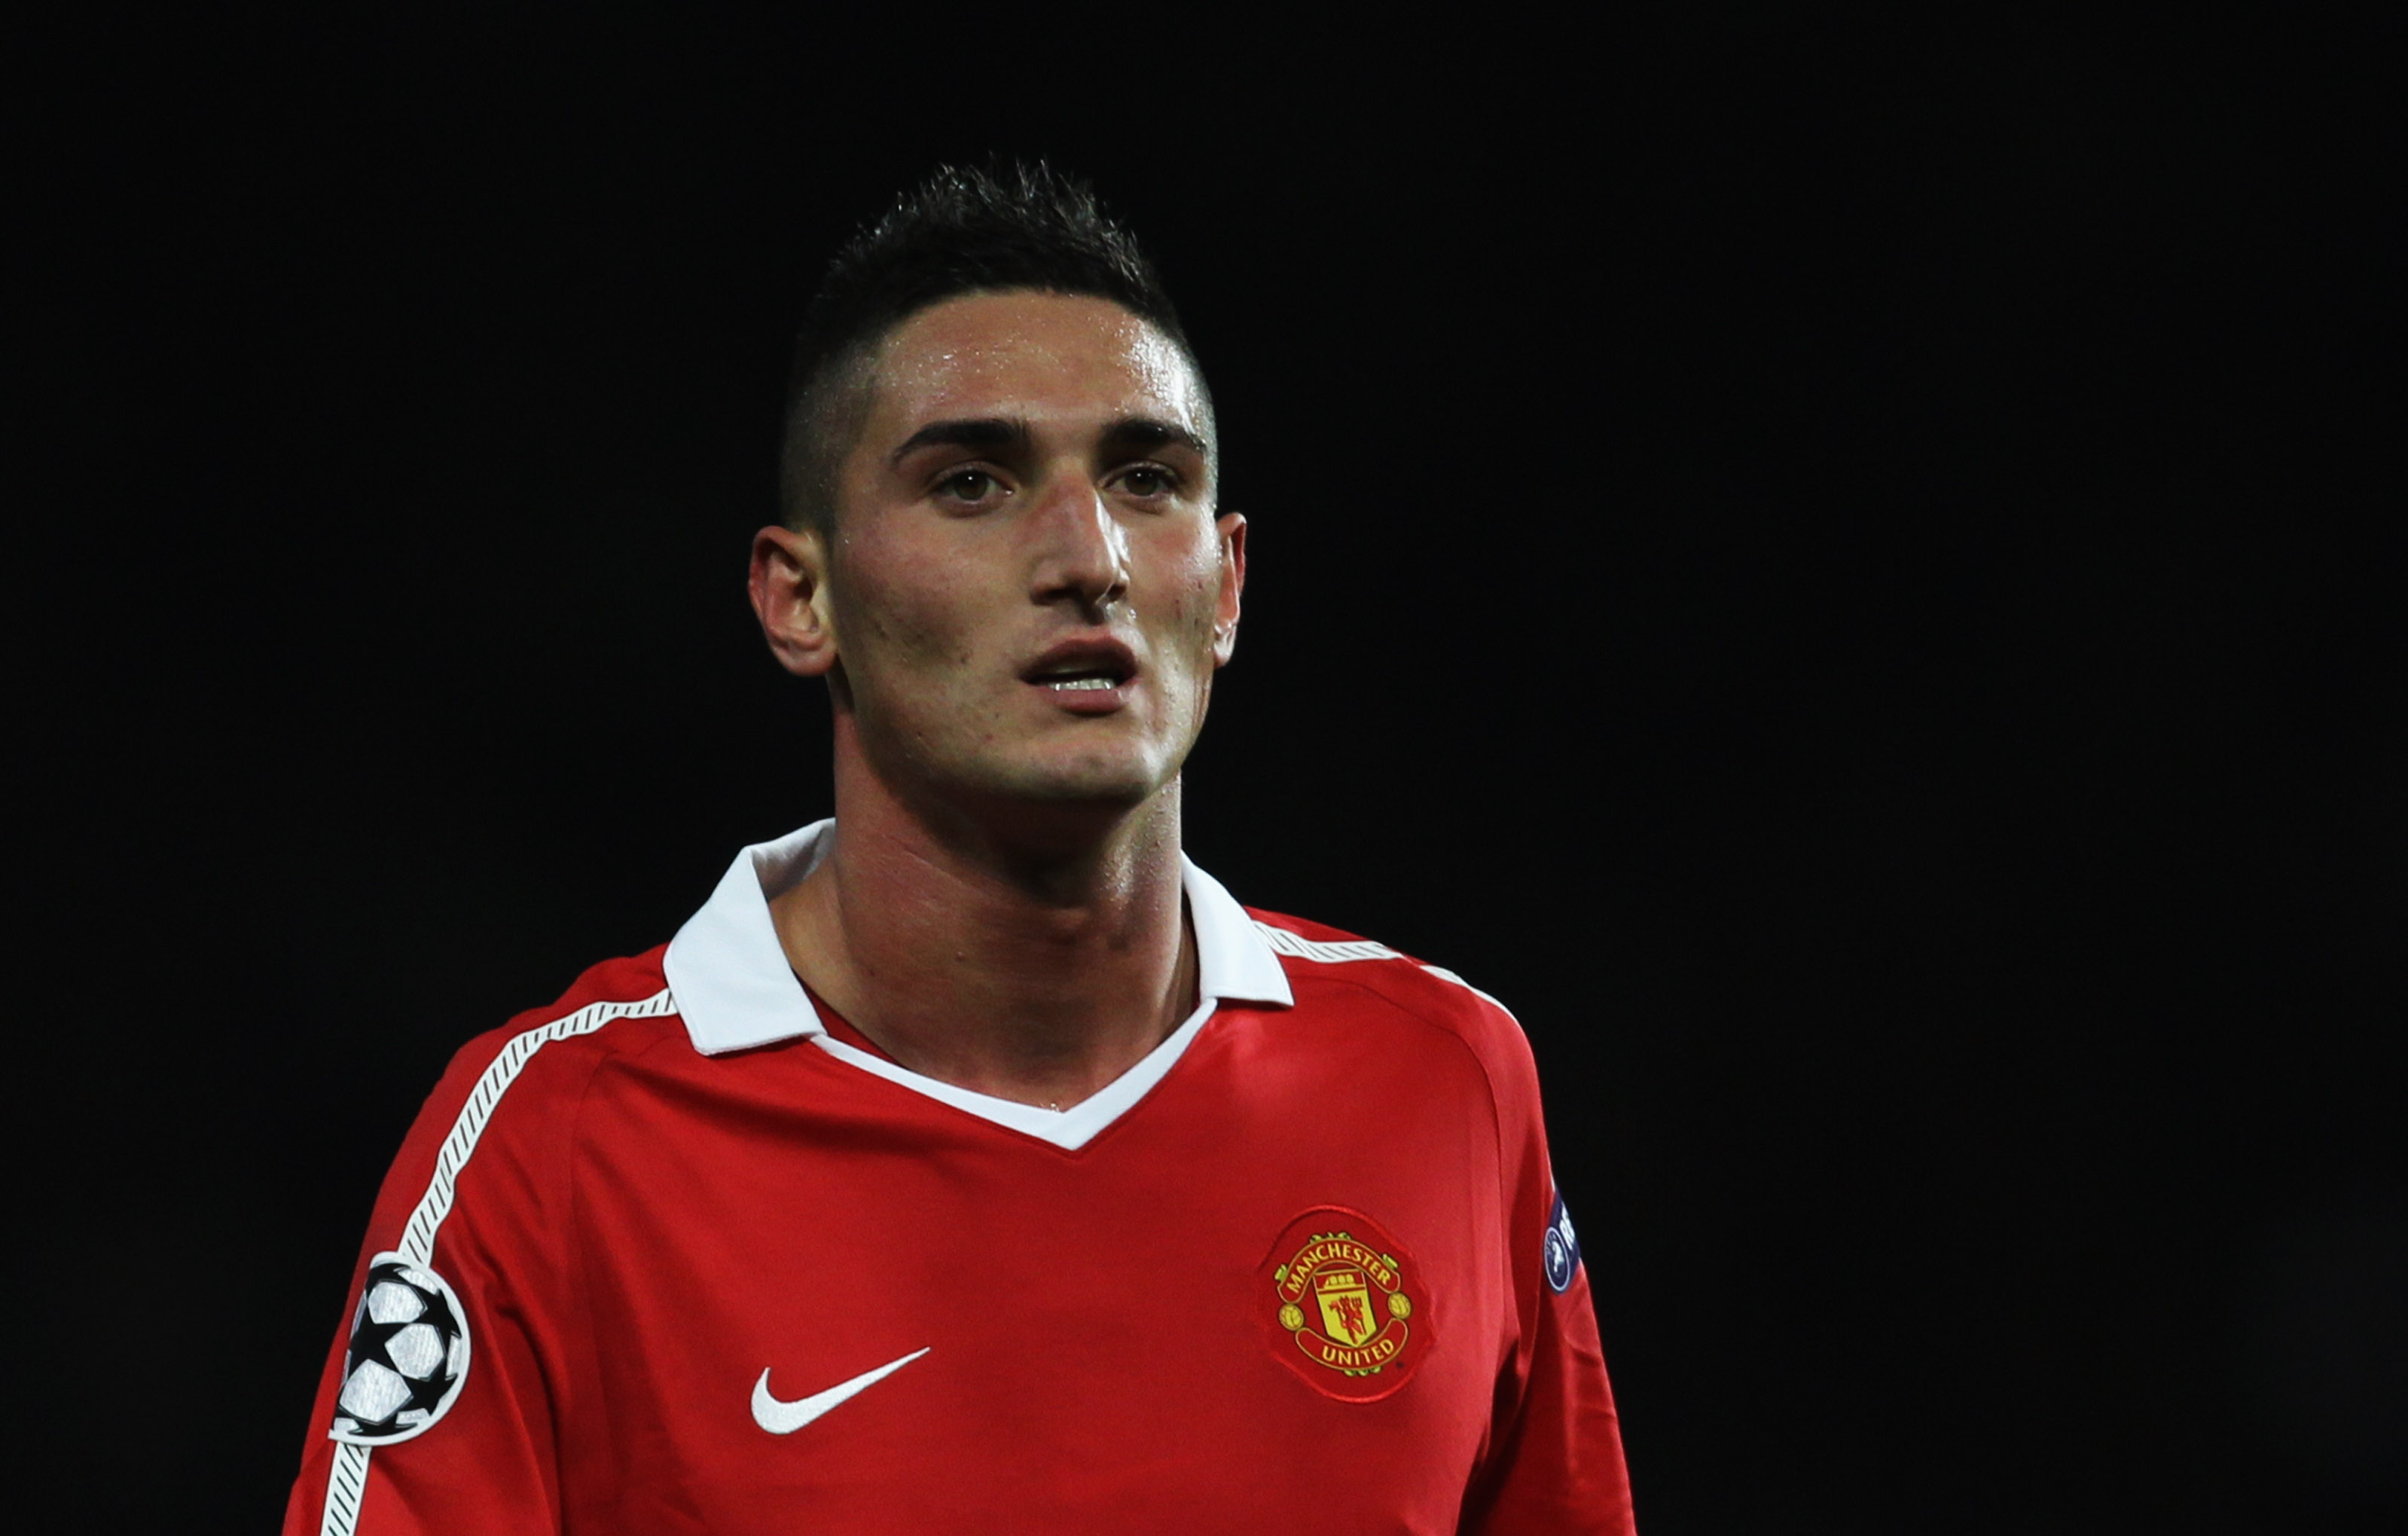 MANCHESTER, ENGLAND - OCTOBER 20:  Federico Macheda of Manchester United looks on during the UEFA Champions League Group C  match between Manchester United and Bursaspor Kulubu at Old Trafford on October 20, 2010 in Manchester, England.  (Photo by Alex Li